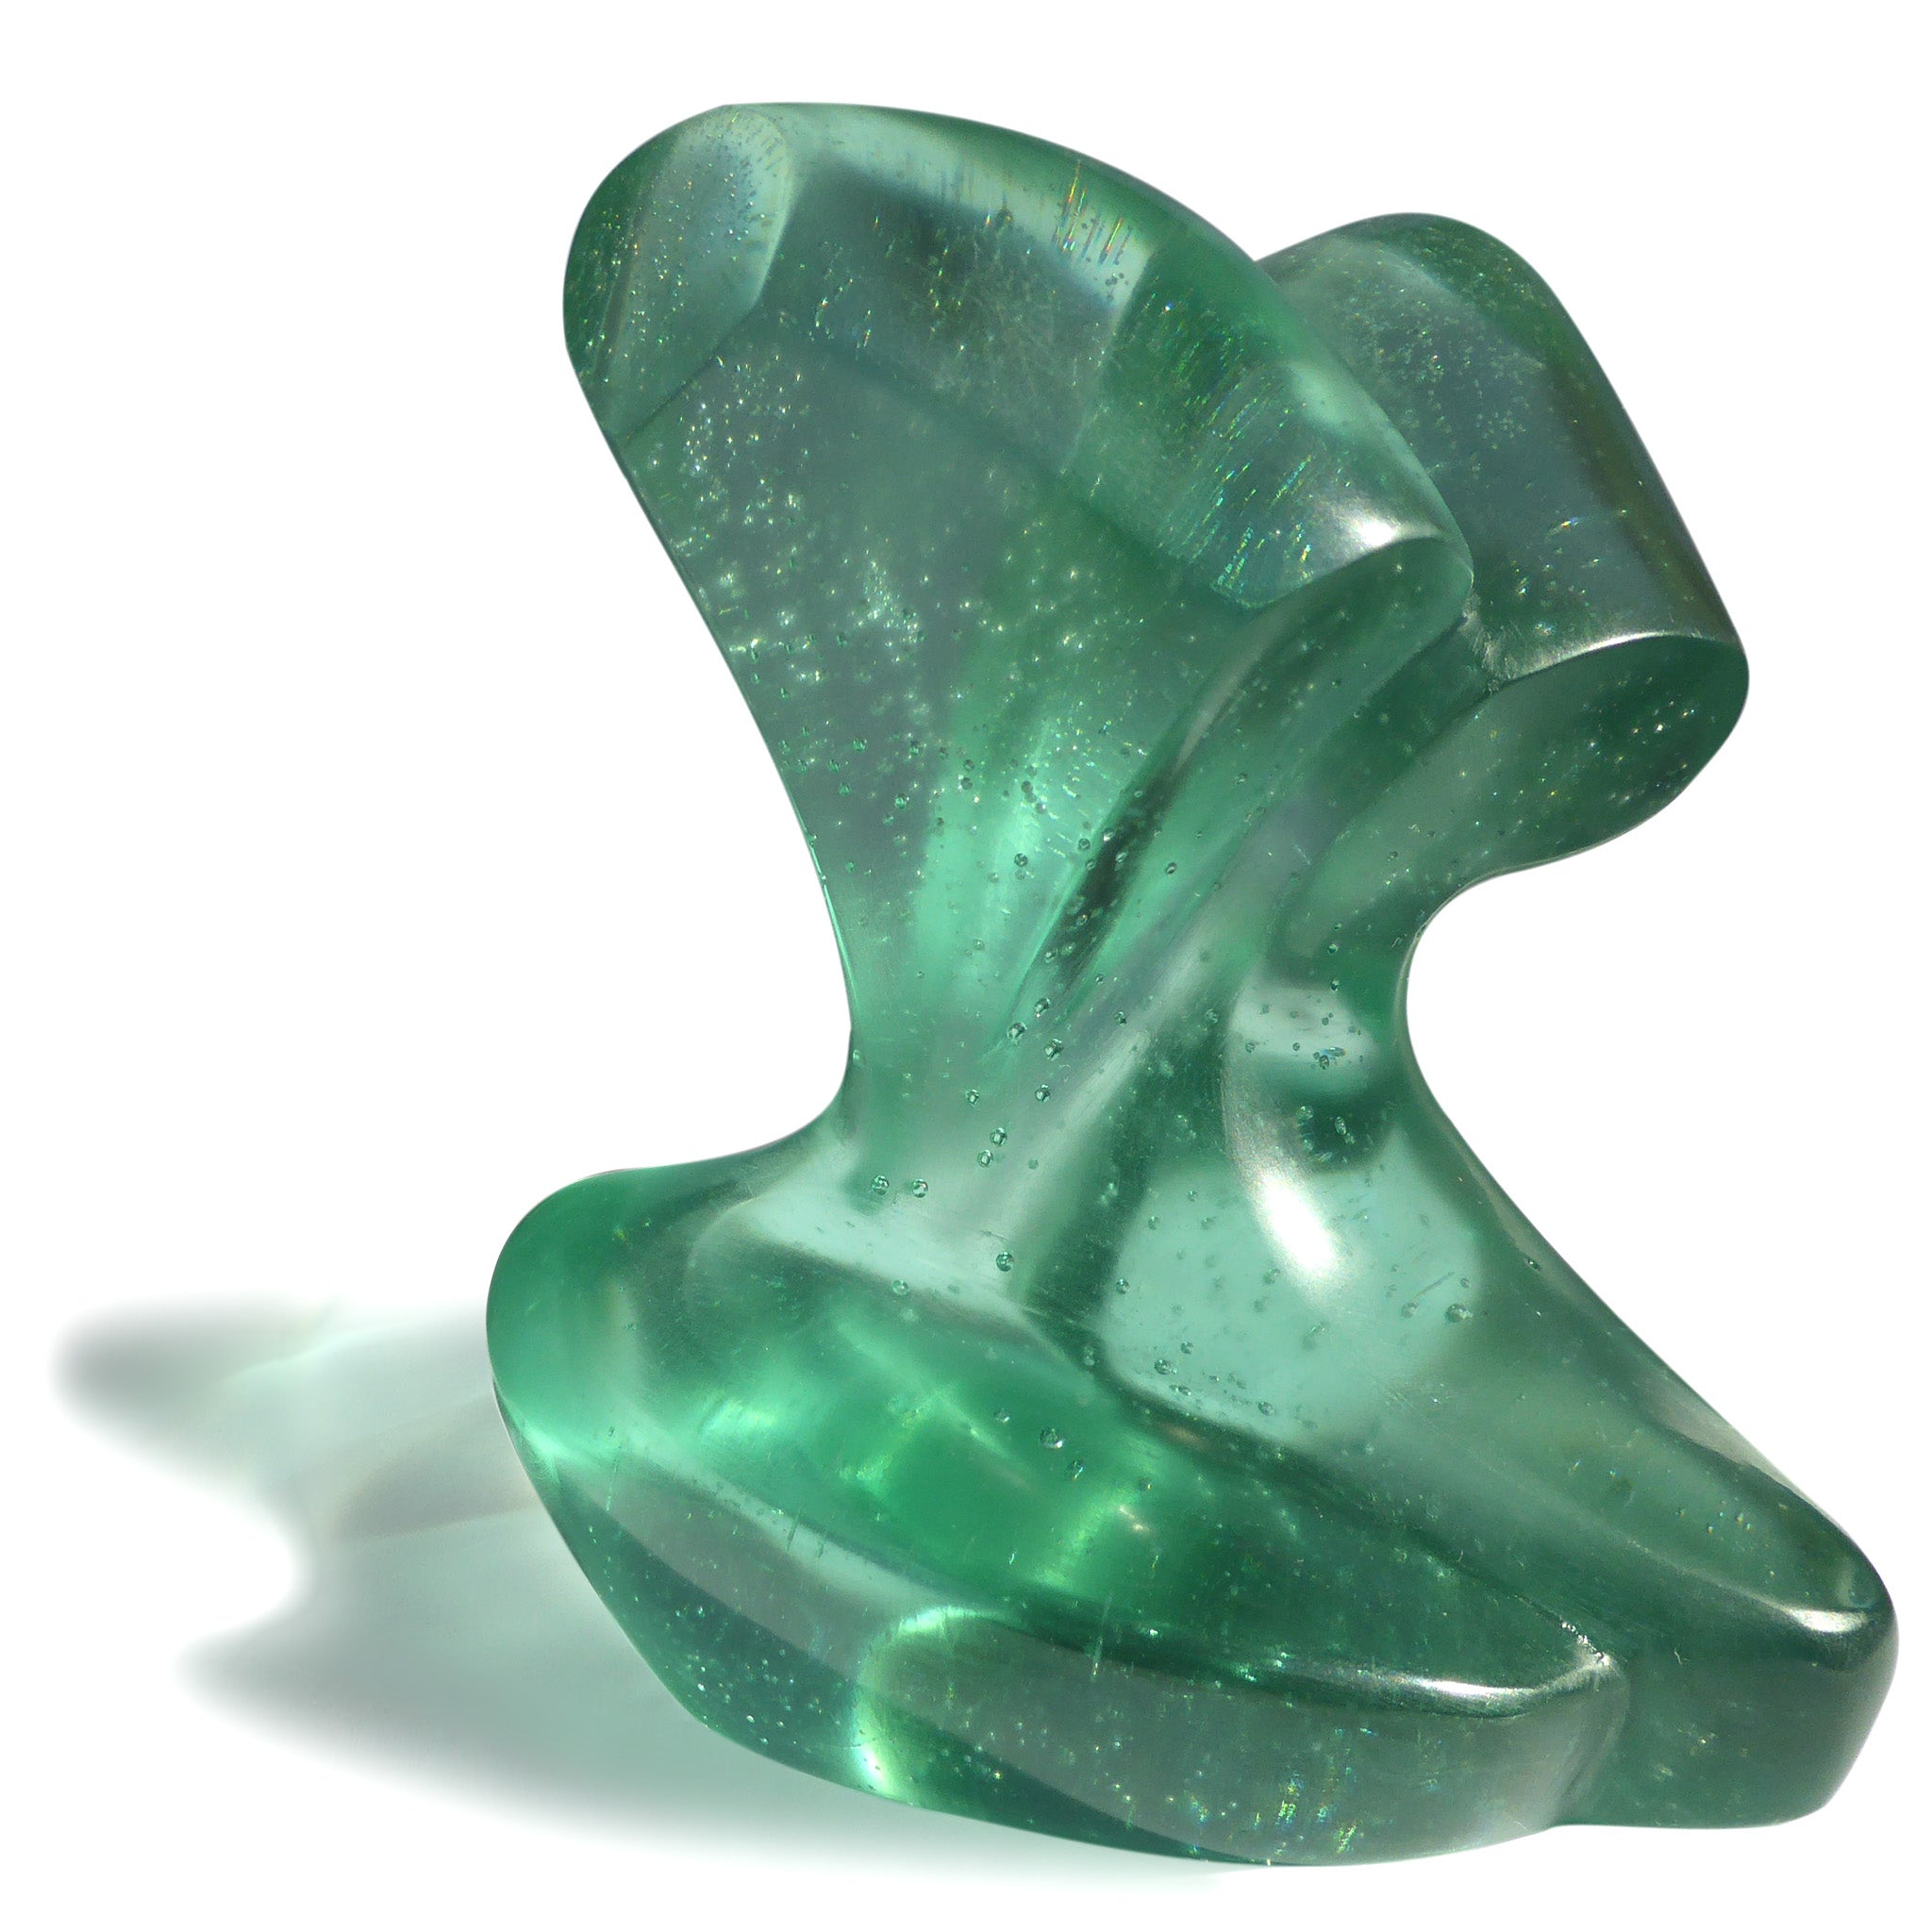 Abstract female figurative cast glass sculpture by Stephen Williams | New Zealand.